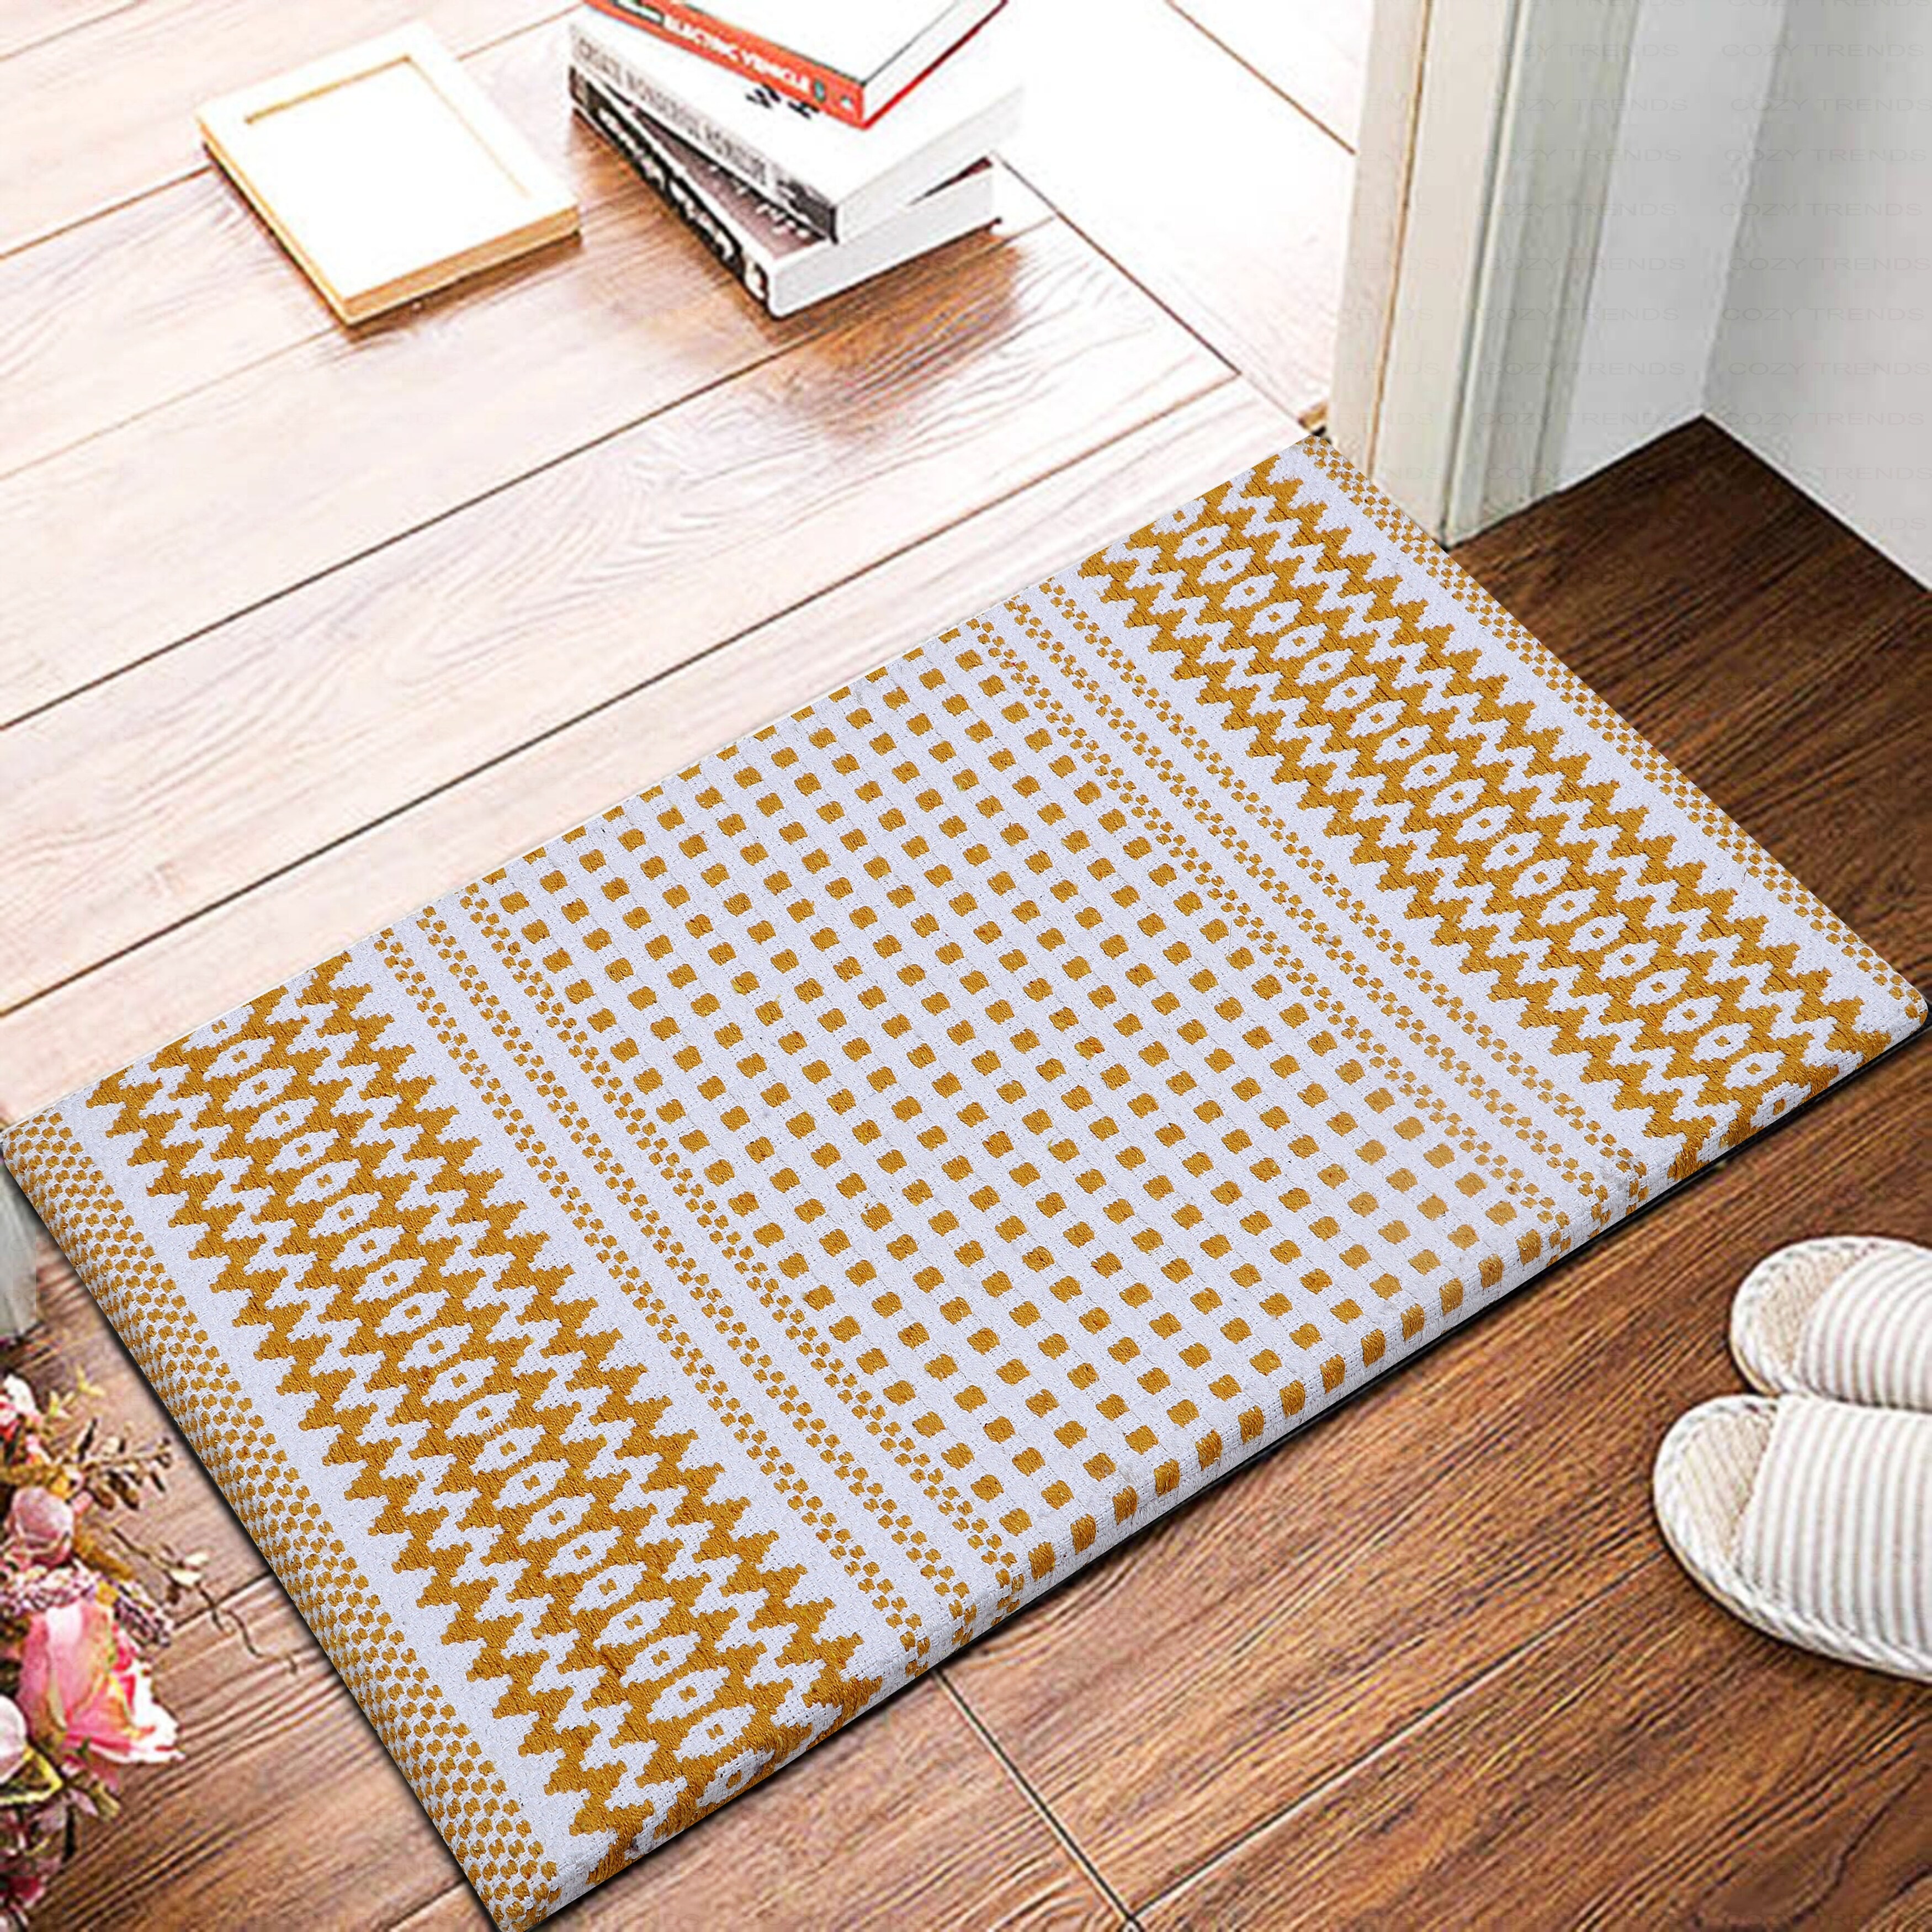 https://ak1.ostkcdn.com/images/products/is/images/direct/91949d841b23158ff630ab413ac195afbdbe00b5/Kitchen-Mat-Cushioned-Anti-Fatigue-Kitchen-Rug%2C-Non-Slip-Mats-Comfort-Foam-Rug-for-Kitchen%2C-Office%2C-Sink%2C-Laundry---18%27%27x30%27%27.jpg